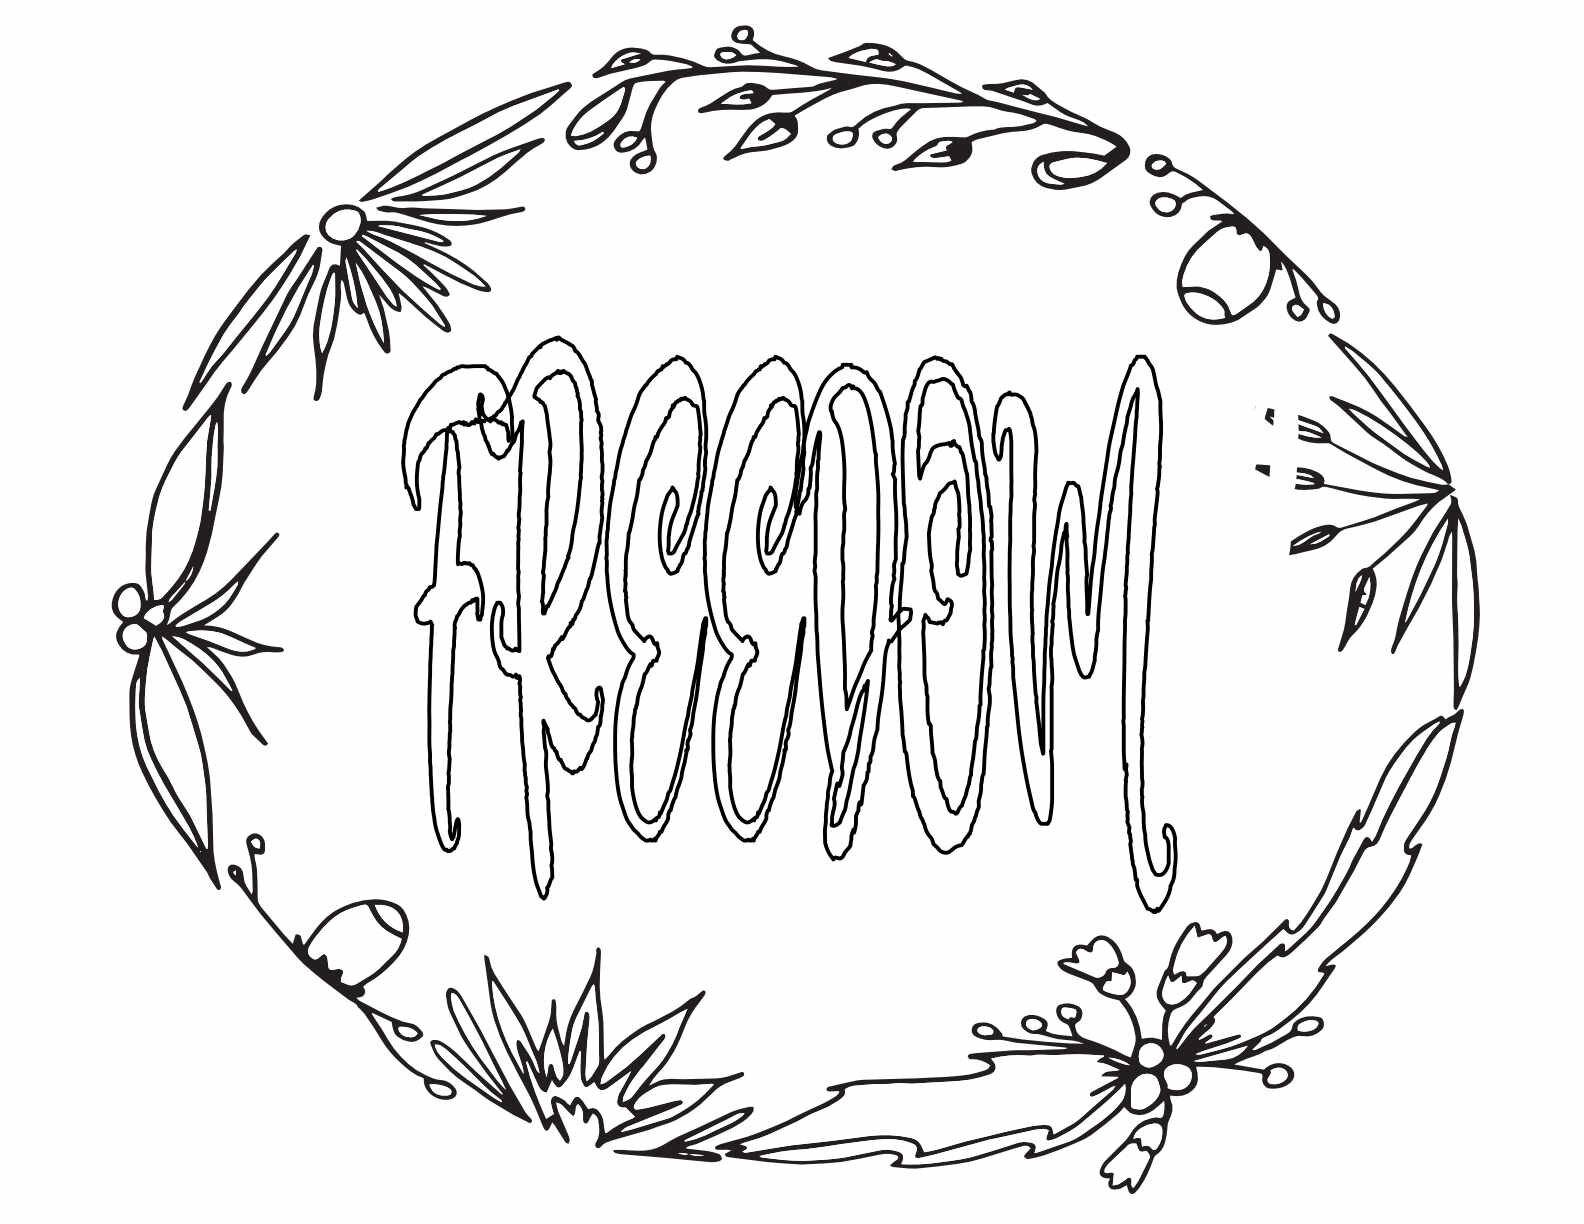 3 Free FREEDOM Printable Coloring Page CLICK HERE TO DOWNLOAD THE PAGE ABOVE